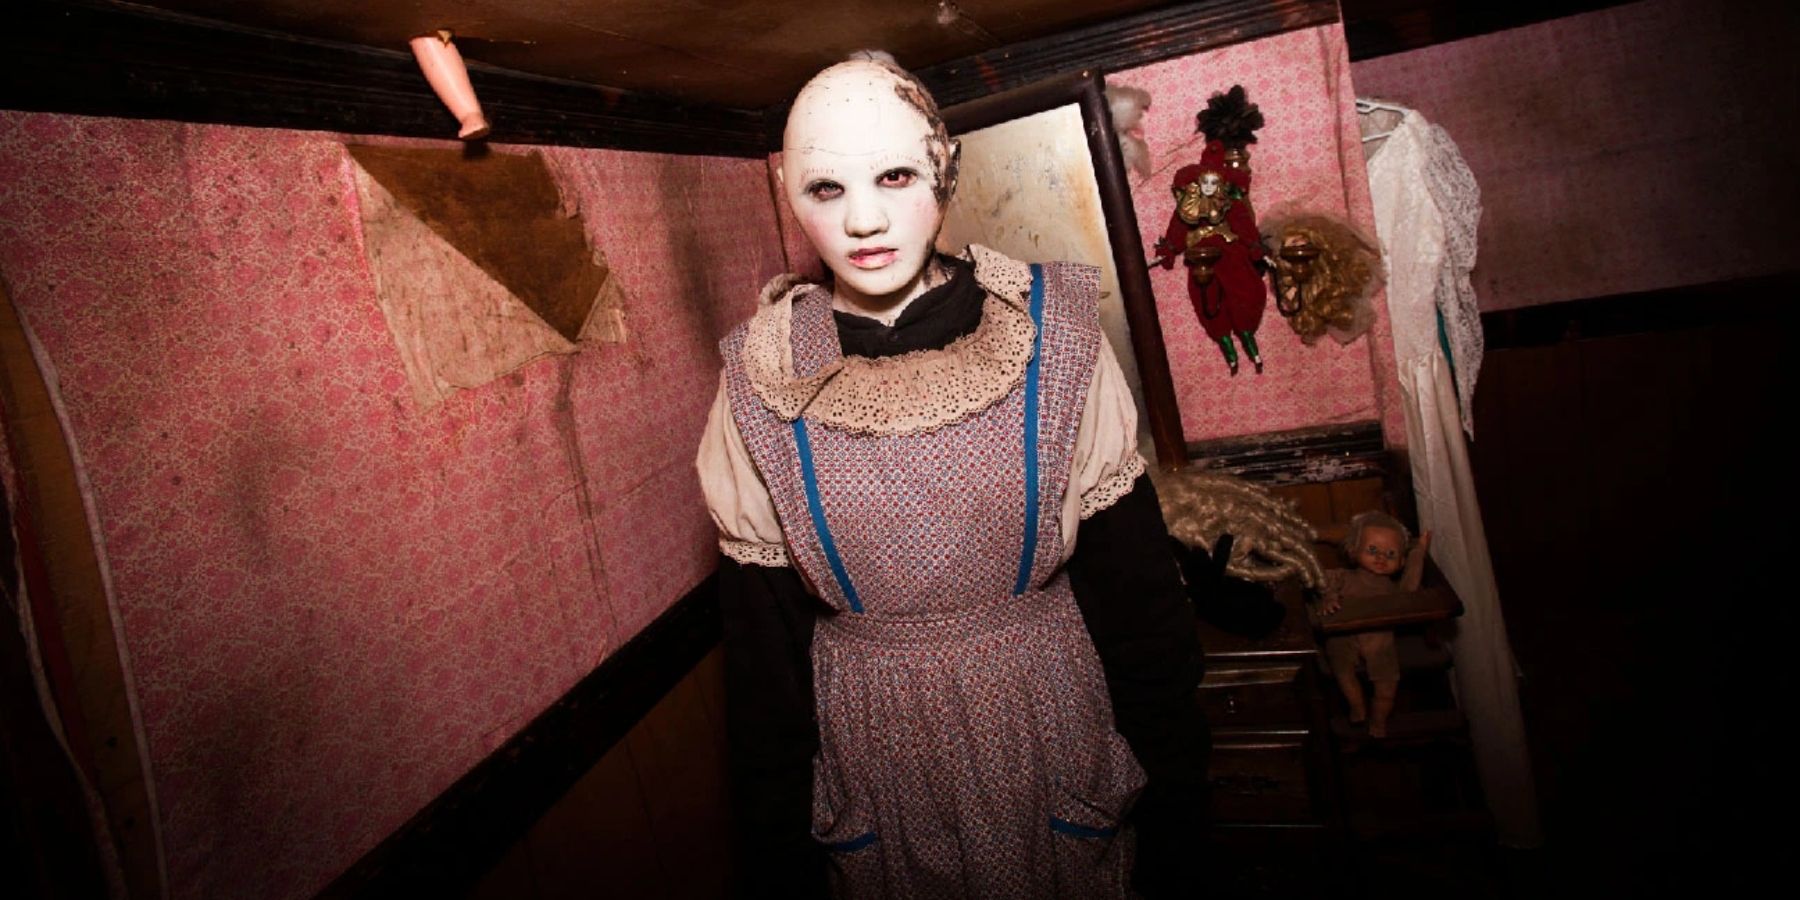 A masked character in a haunted house in The Houses October Built 2.